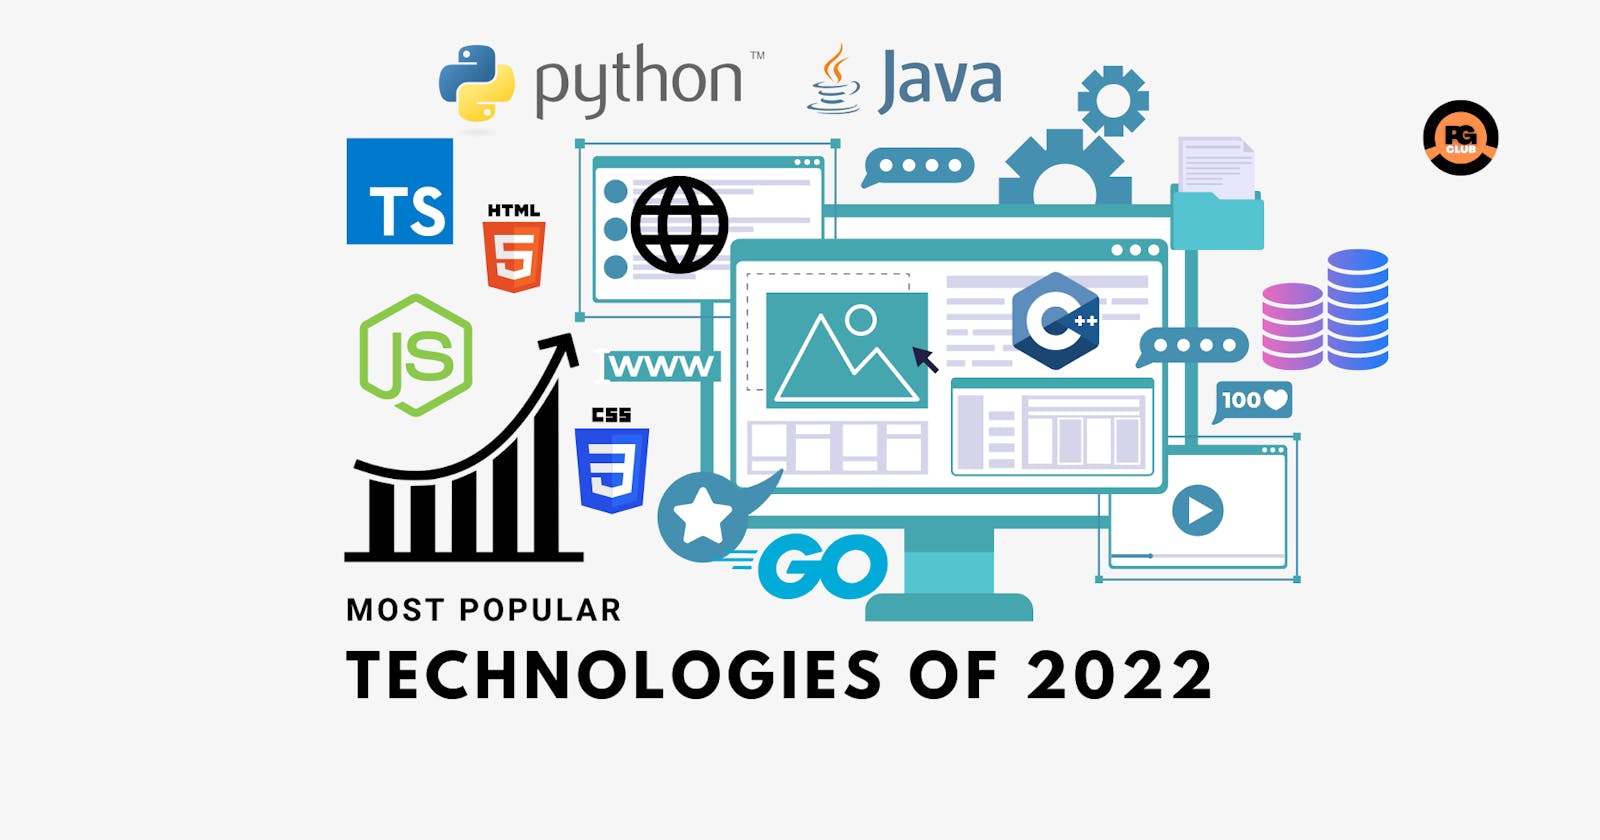 Most Popular Technologies of 2022